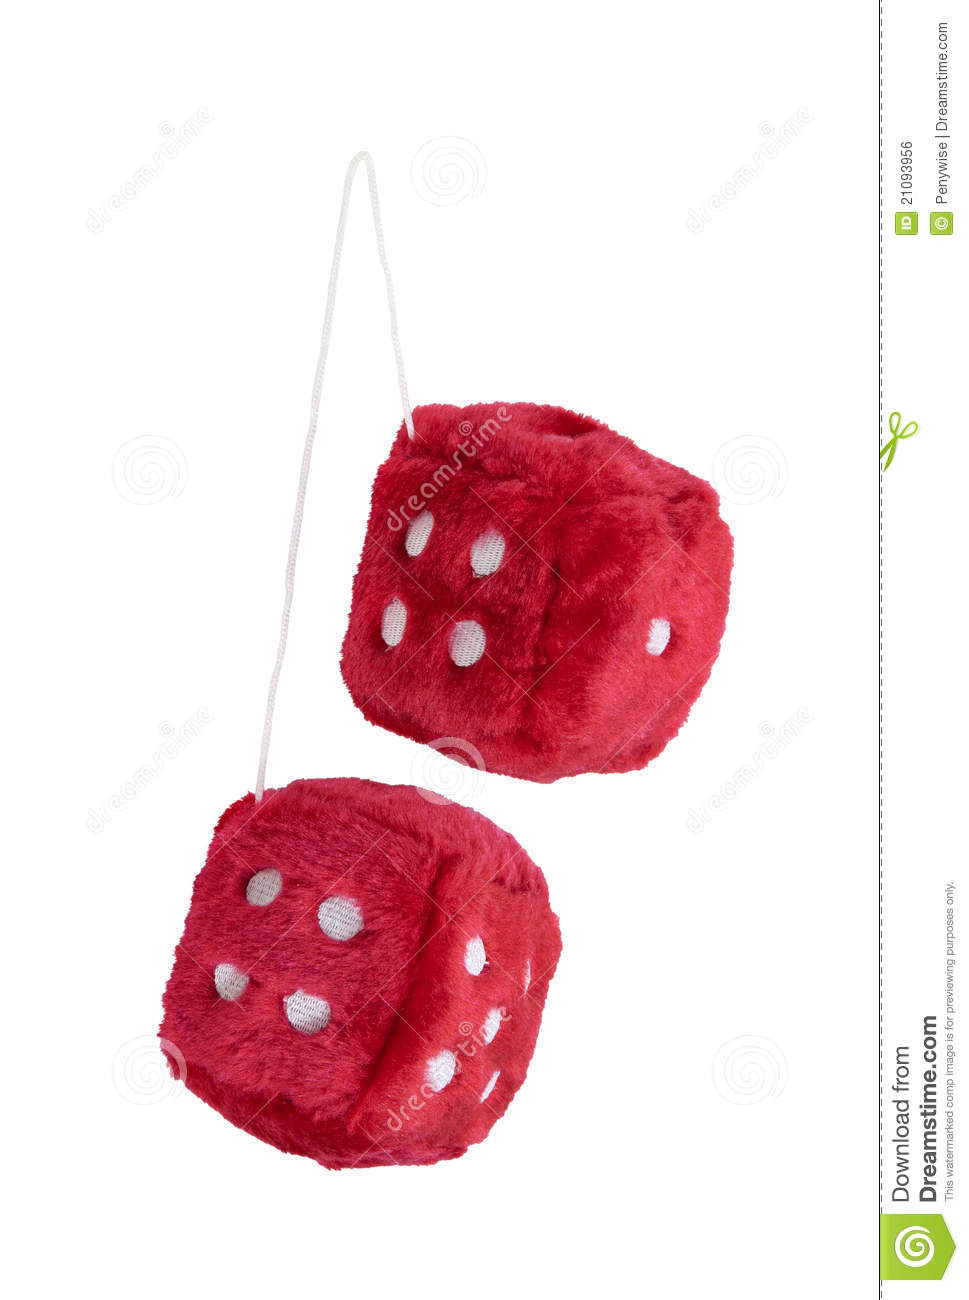 Red Fuzzy Dice With White Dots That Are Usually Hung From The Rear